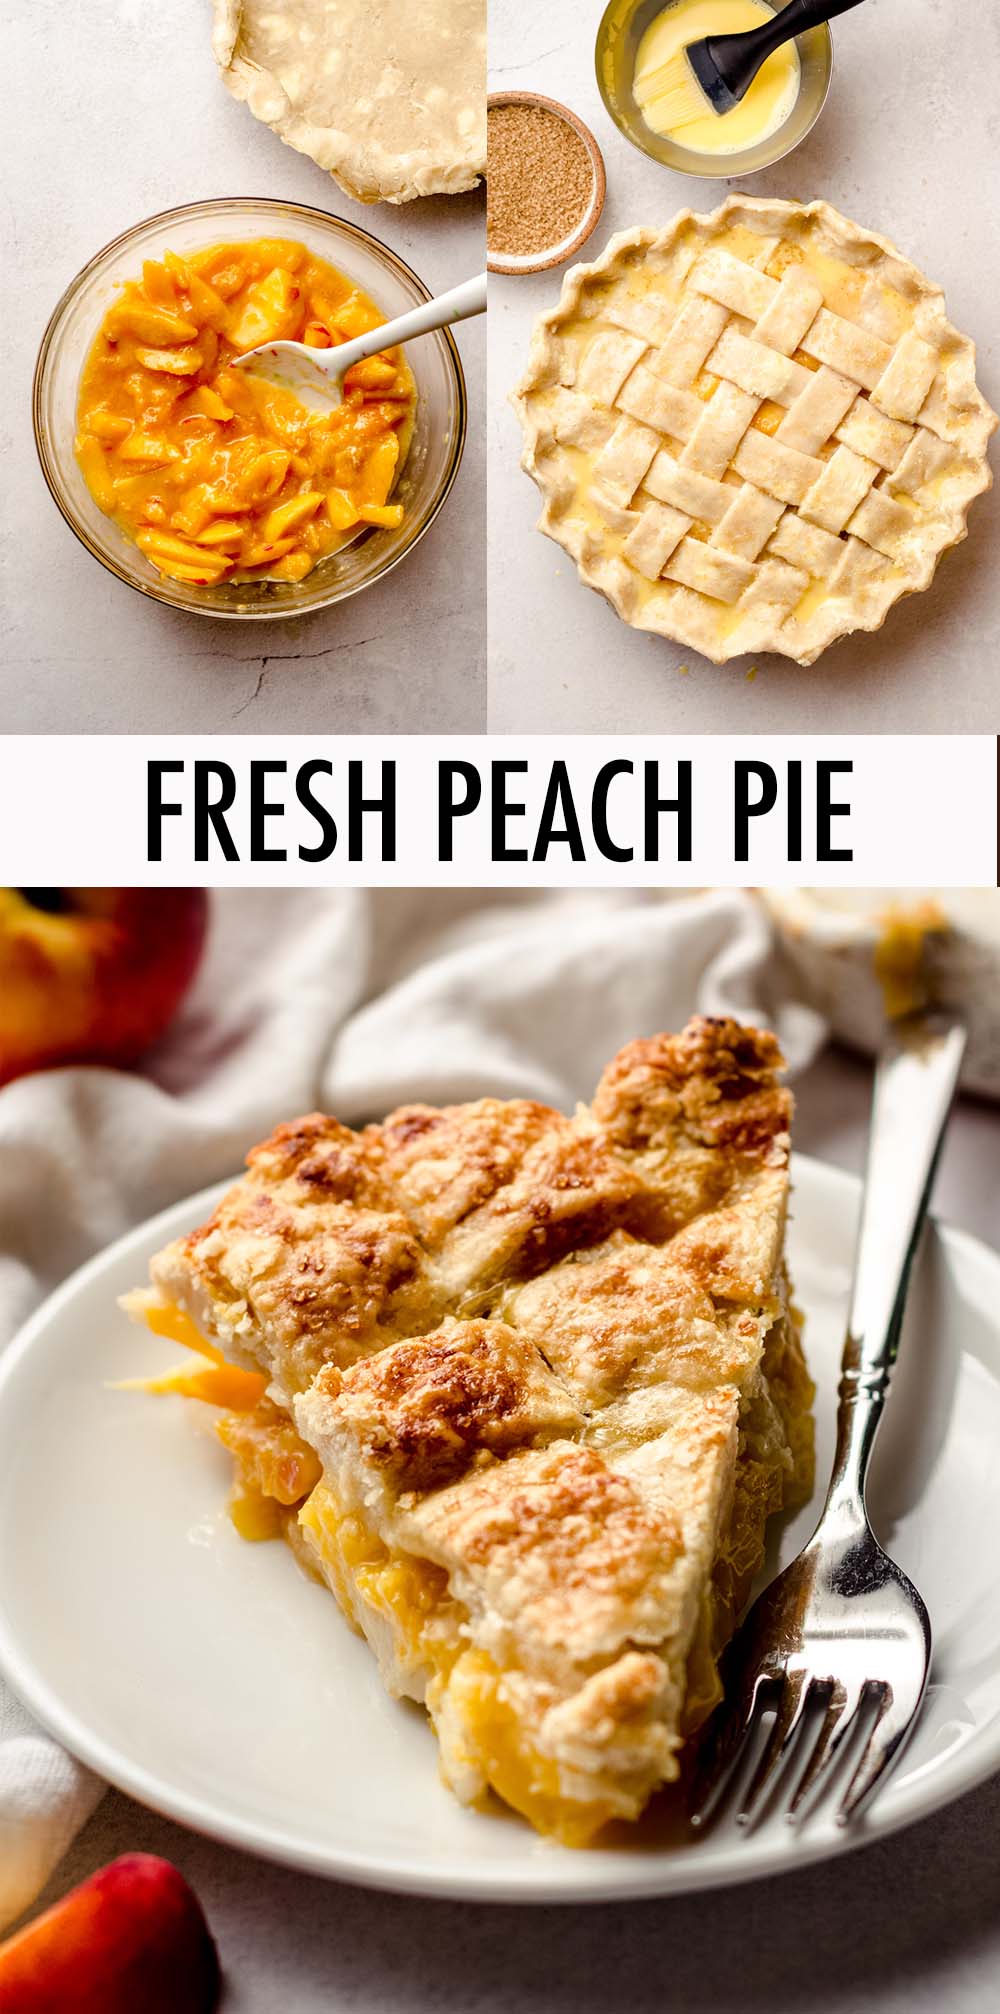 This homemade peach pie recipe features tender, juicy peaches inside a buttery and flaky homemade pie crust. Finish it off with a beautiful lattice top, a sturdy double crust, or a cinnamon streusel topping. via @frshaprilflours